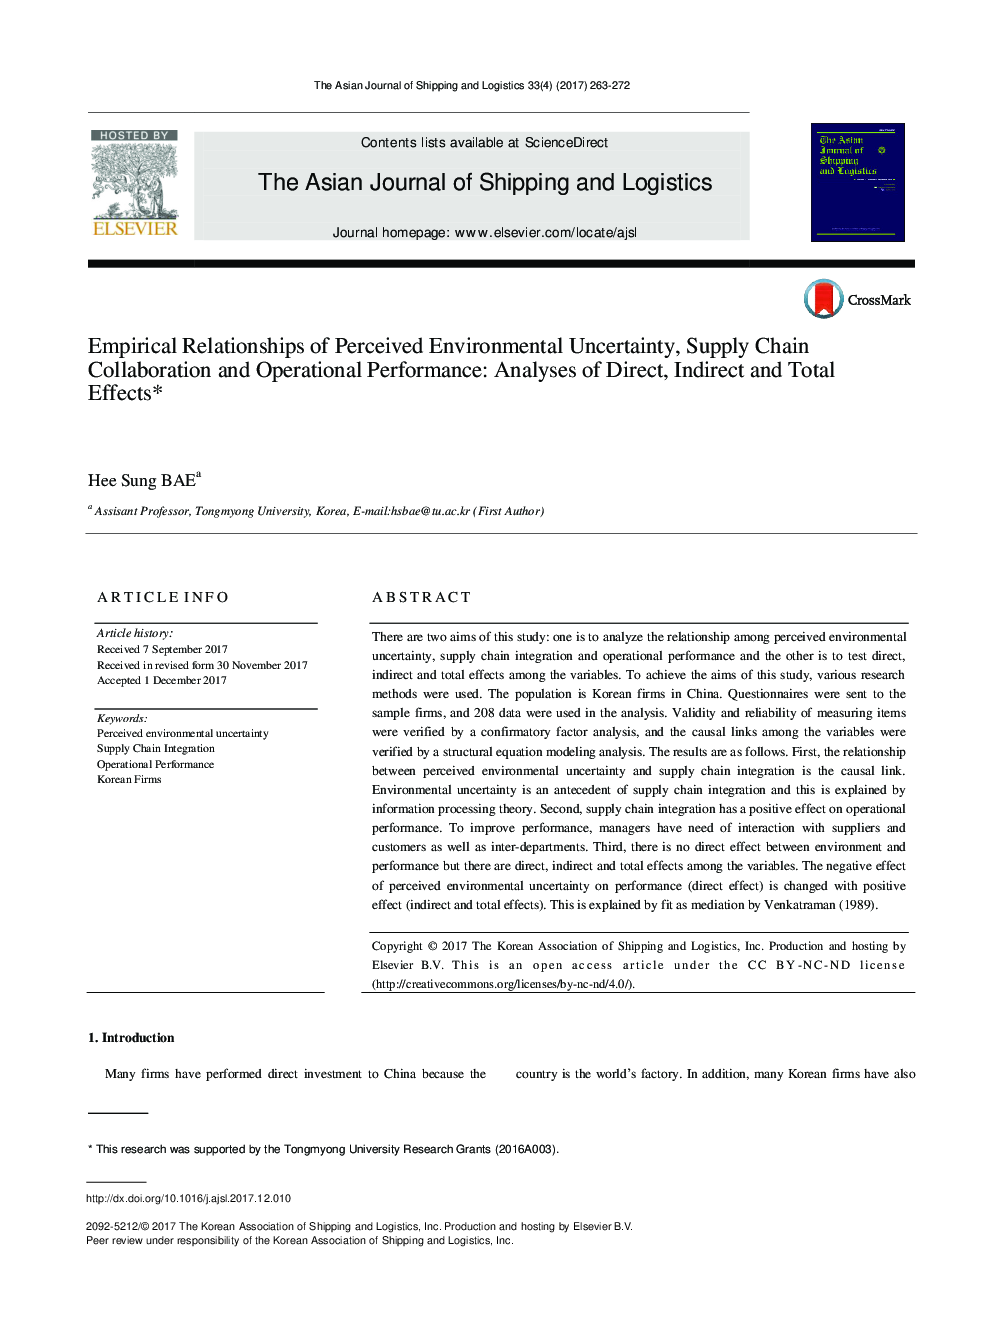 Empirical Relationships of Perceived Environmental Uncertainty, Supply Chain Collaboration and Operational Performance: Analyses of Direct, Indirect and Total Effects